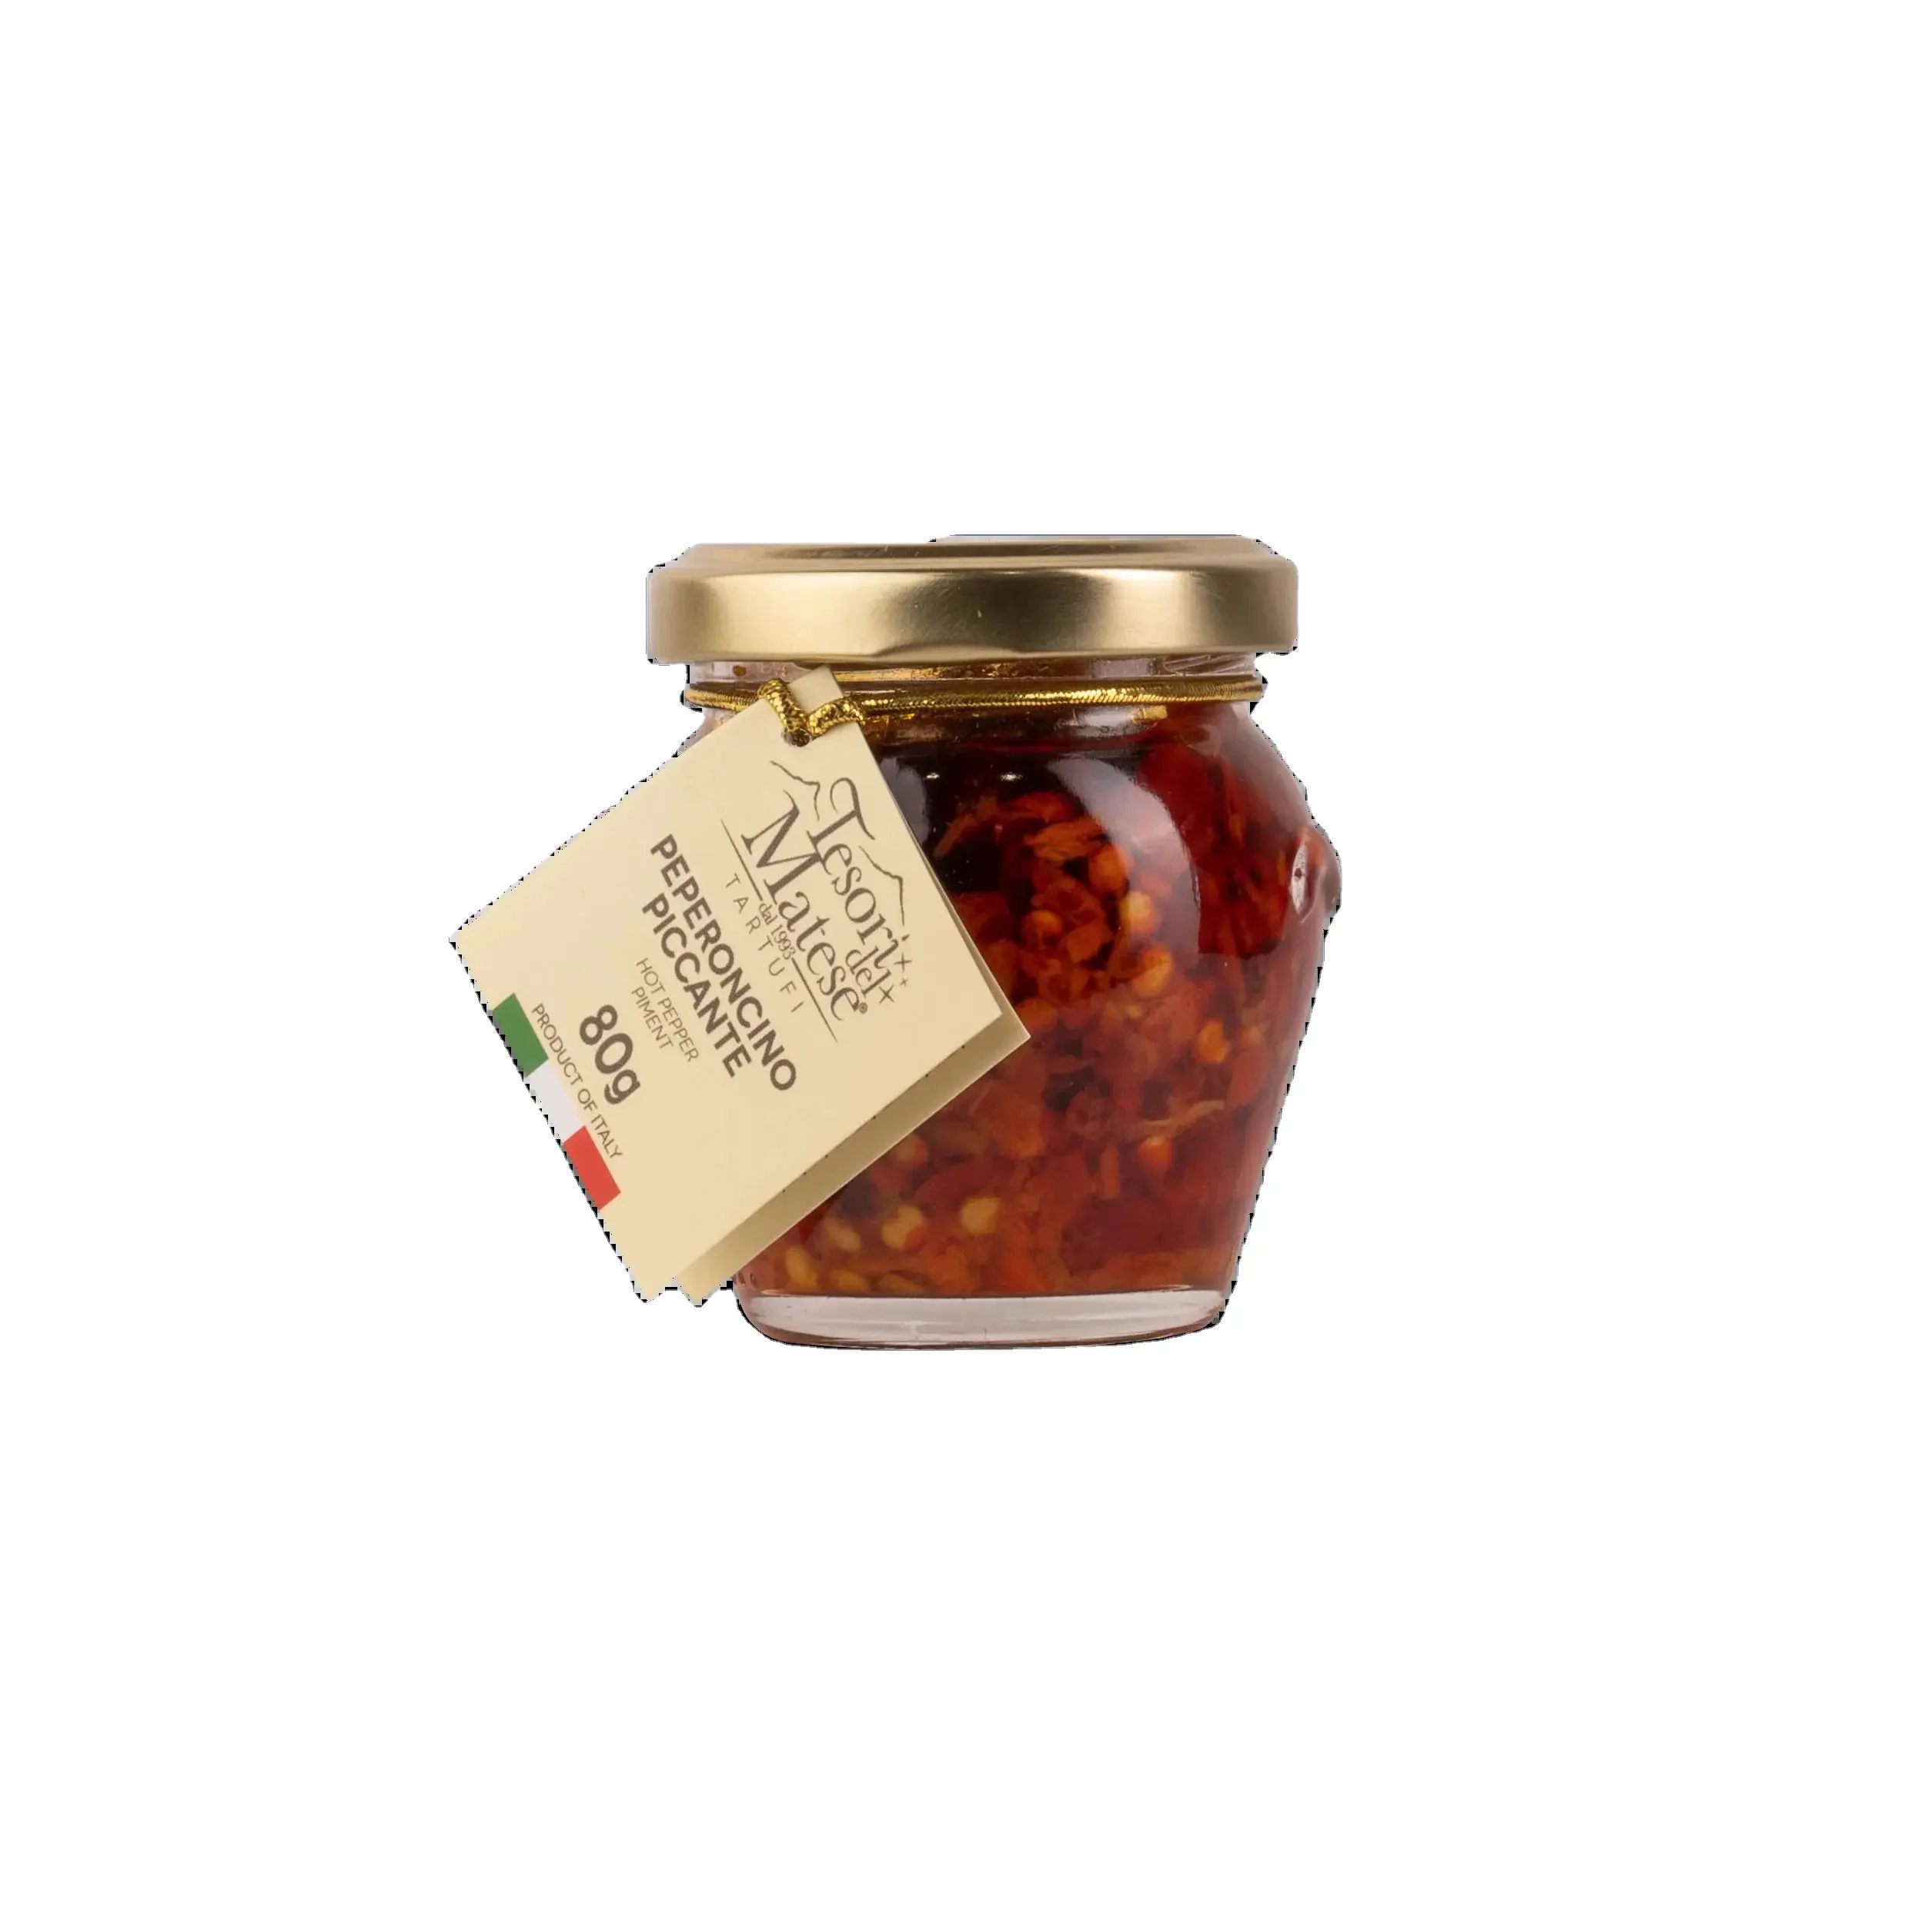 Premium Quality Italian Origin Fresh Hot Pepper 80g Intense Flavor Glass Jar Packaging Perfect for Export and Wholesale